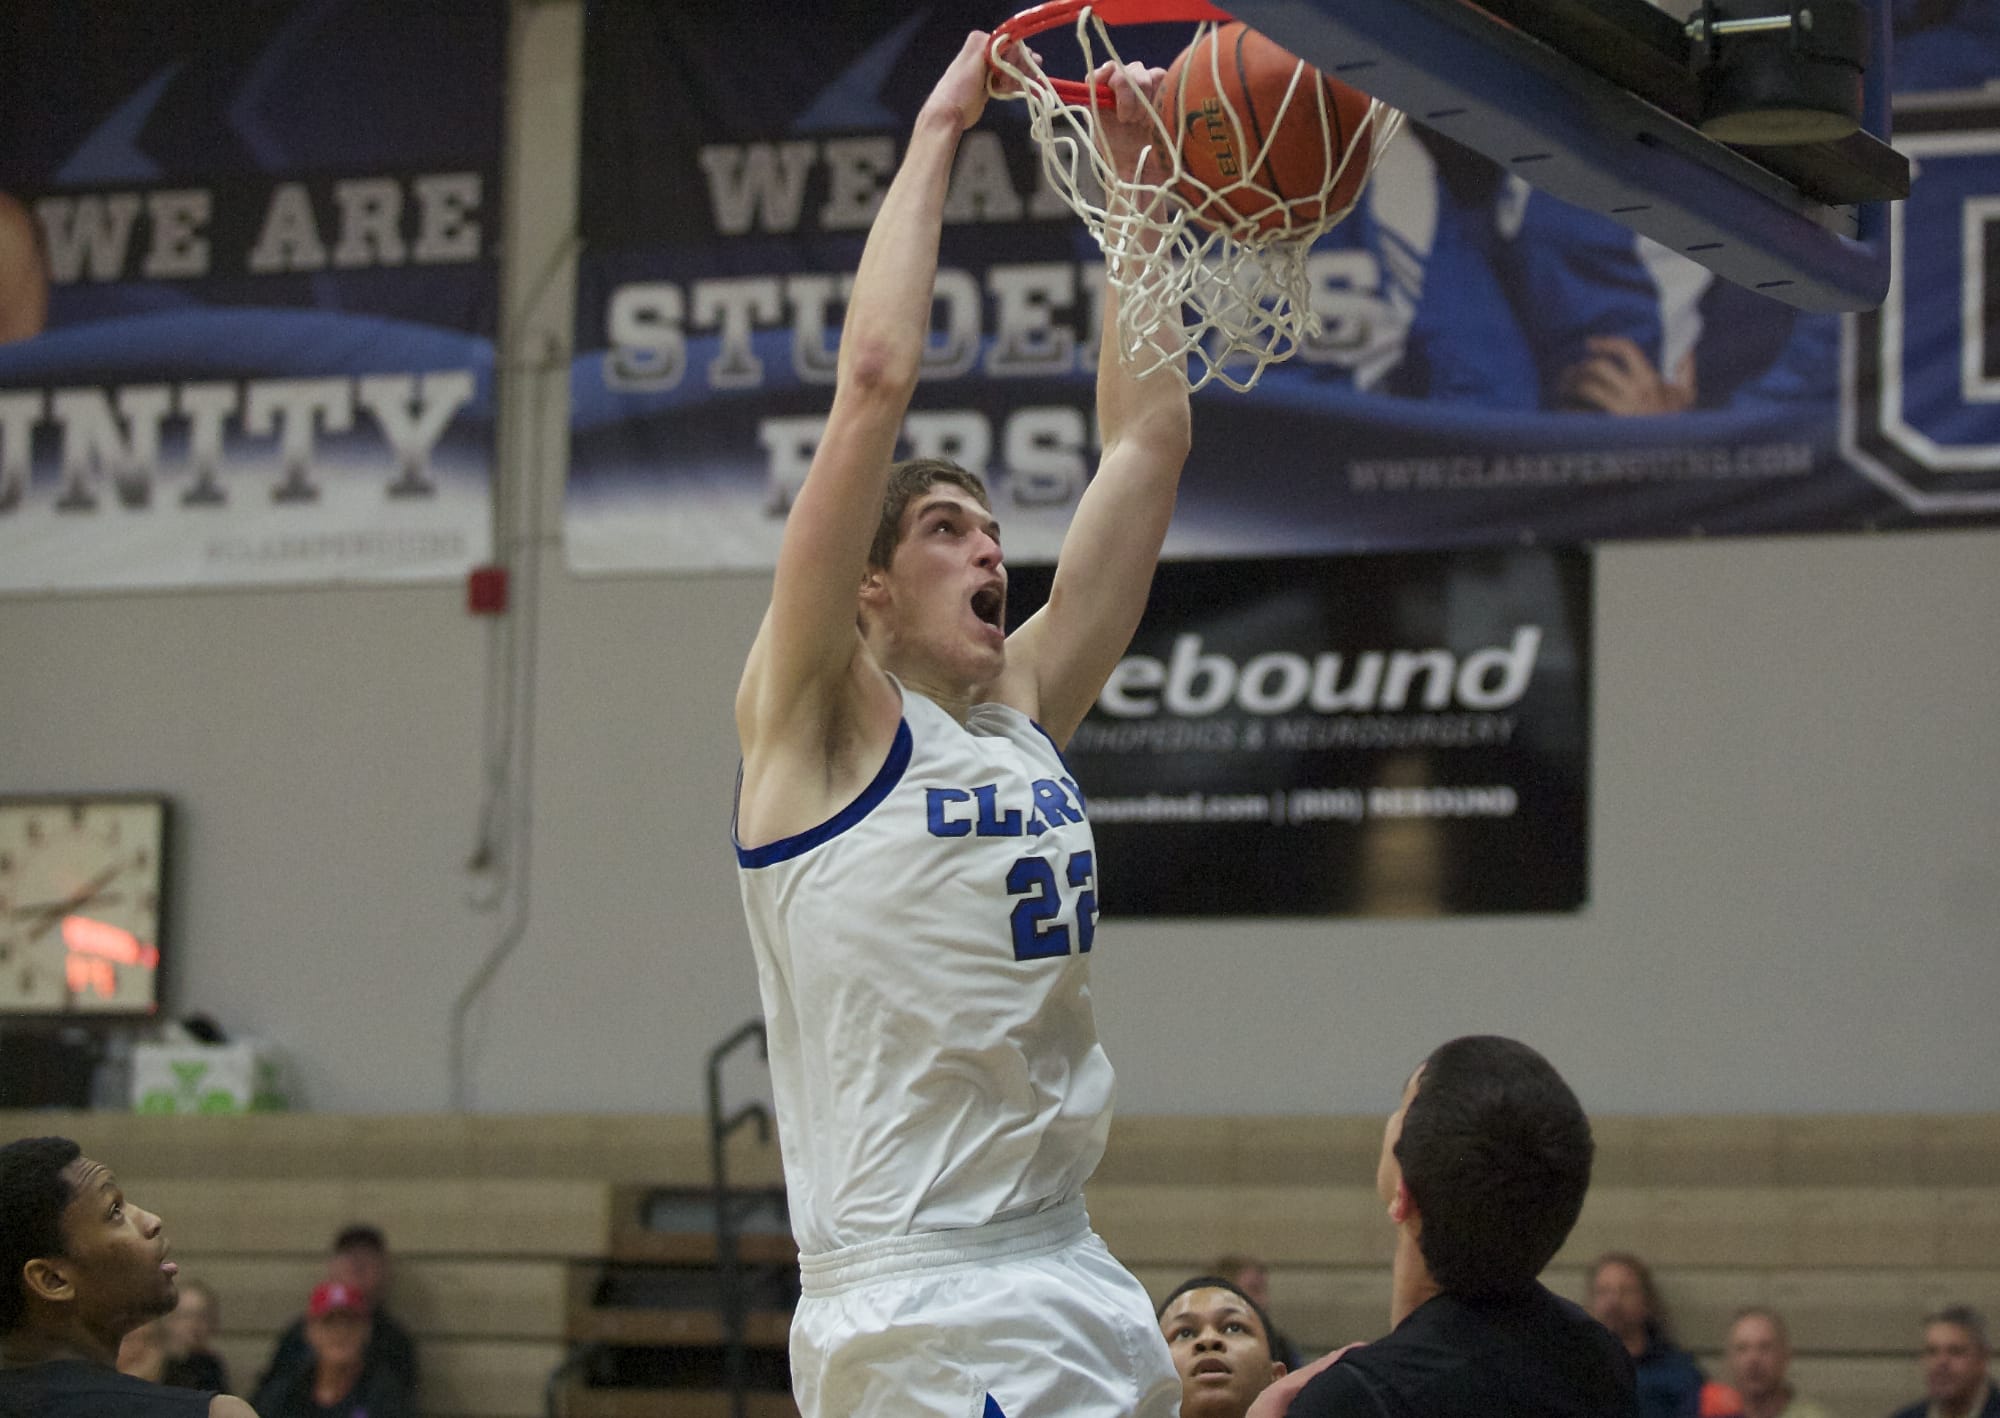 Clark's Collin Spickerman throws down a dunk in the first half against Highline on Saturday.